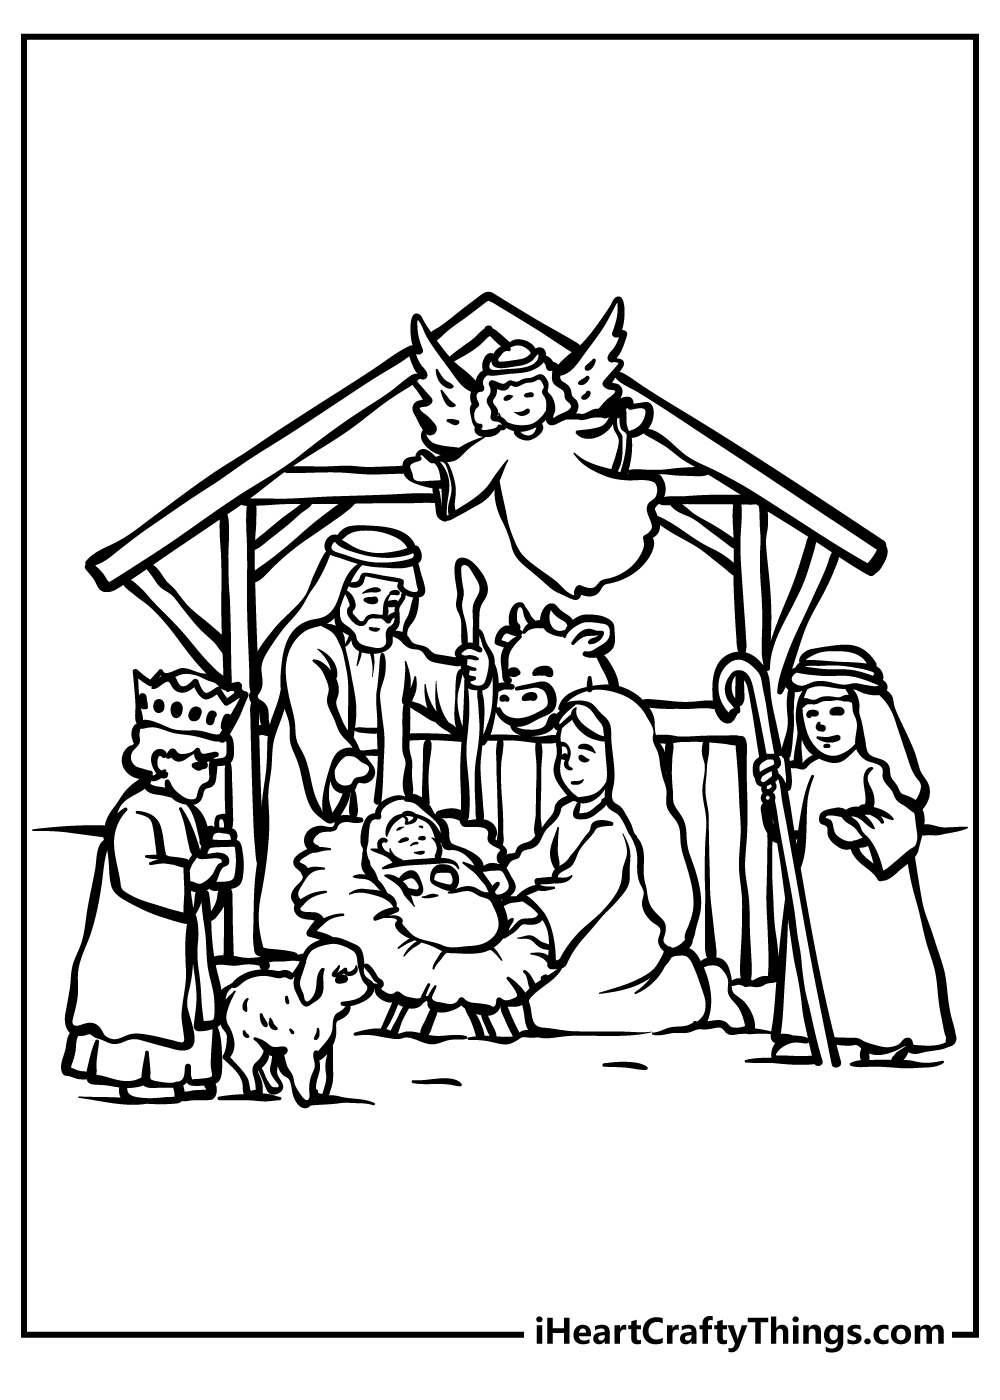 Nativity coloring pages free printables